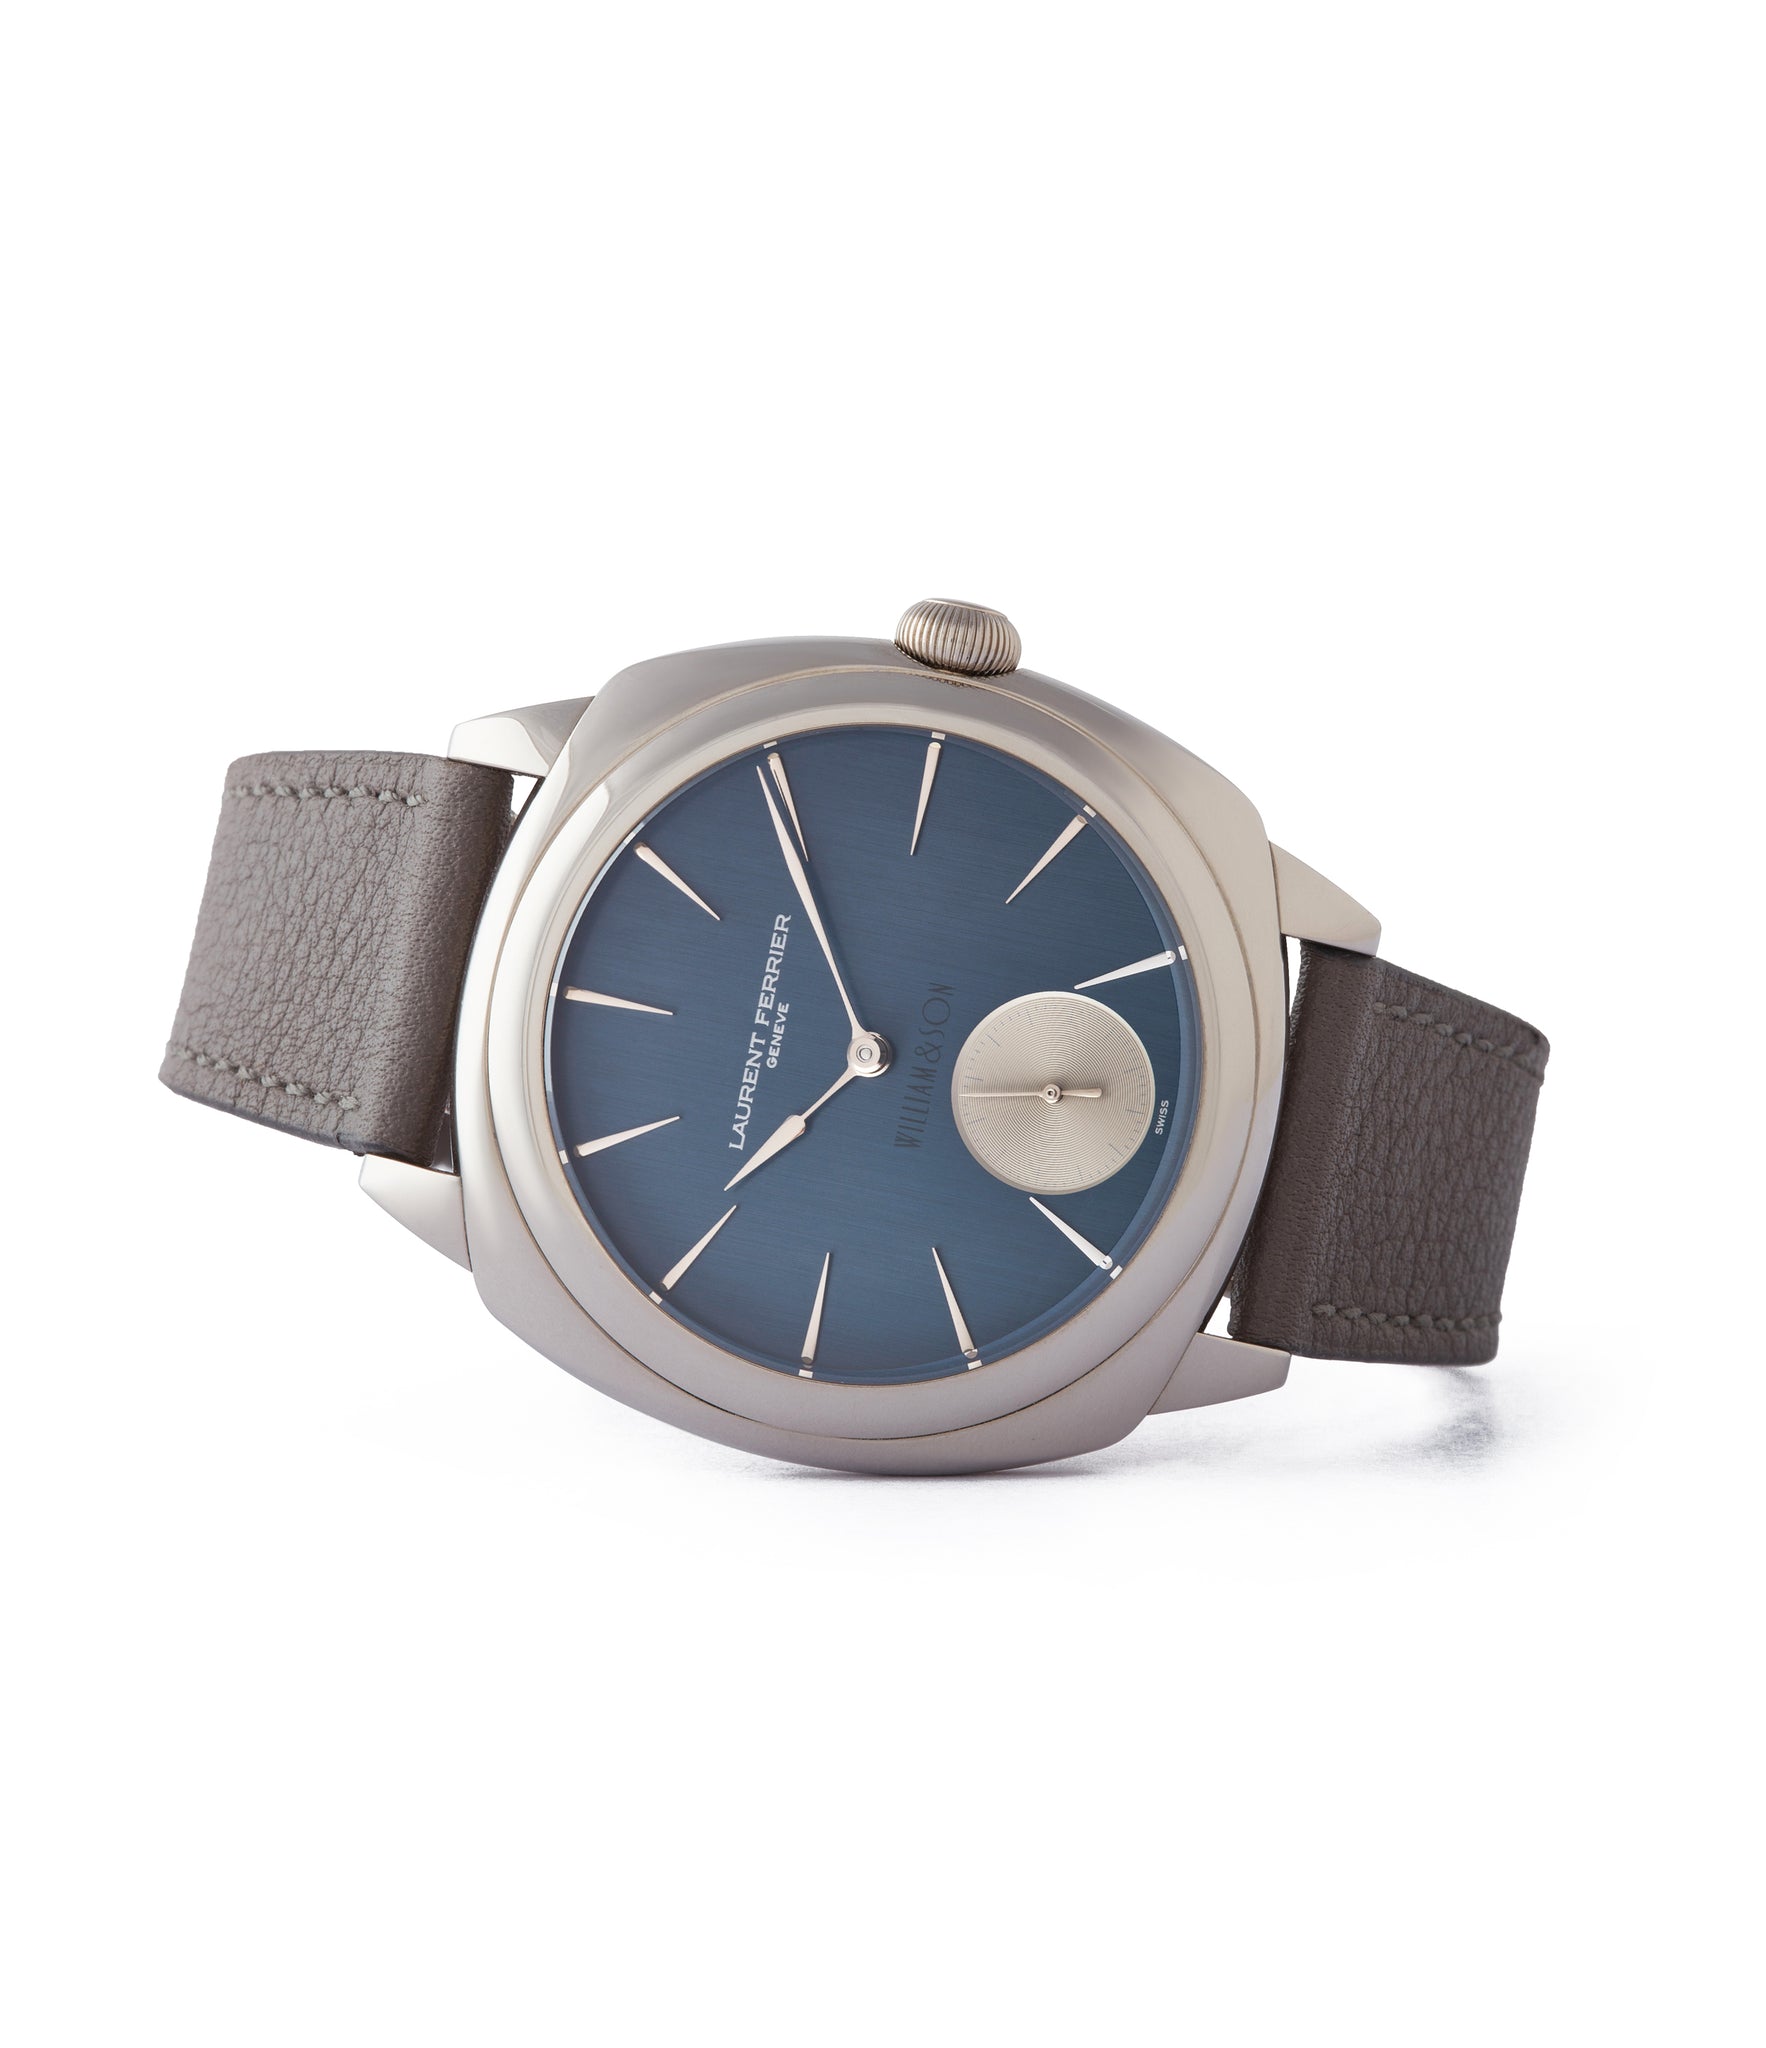 side-shot wirstwatch Laurent Ferrier Micro Rotor LF 229.01 Galet Square William&Son blue dial white gold watch online at A Collected Man London approved seller of preowned independent watchmakers